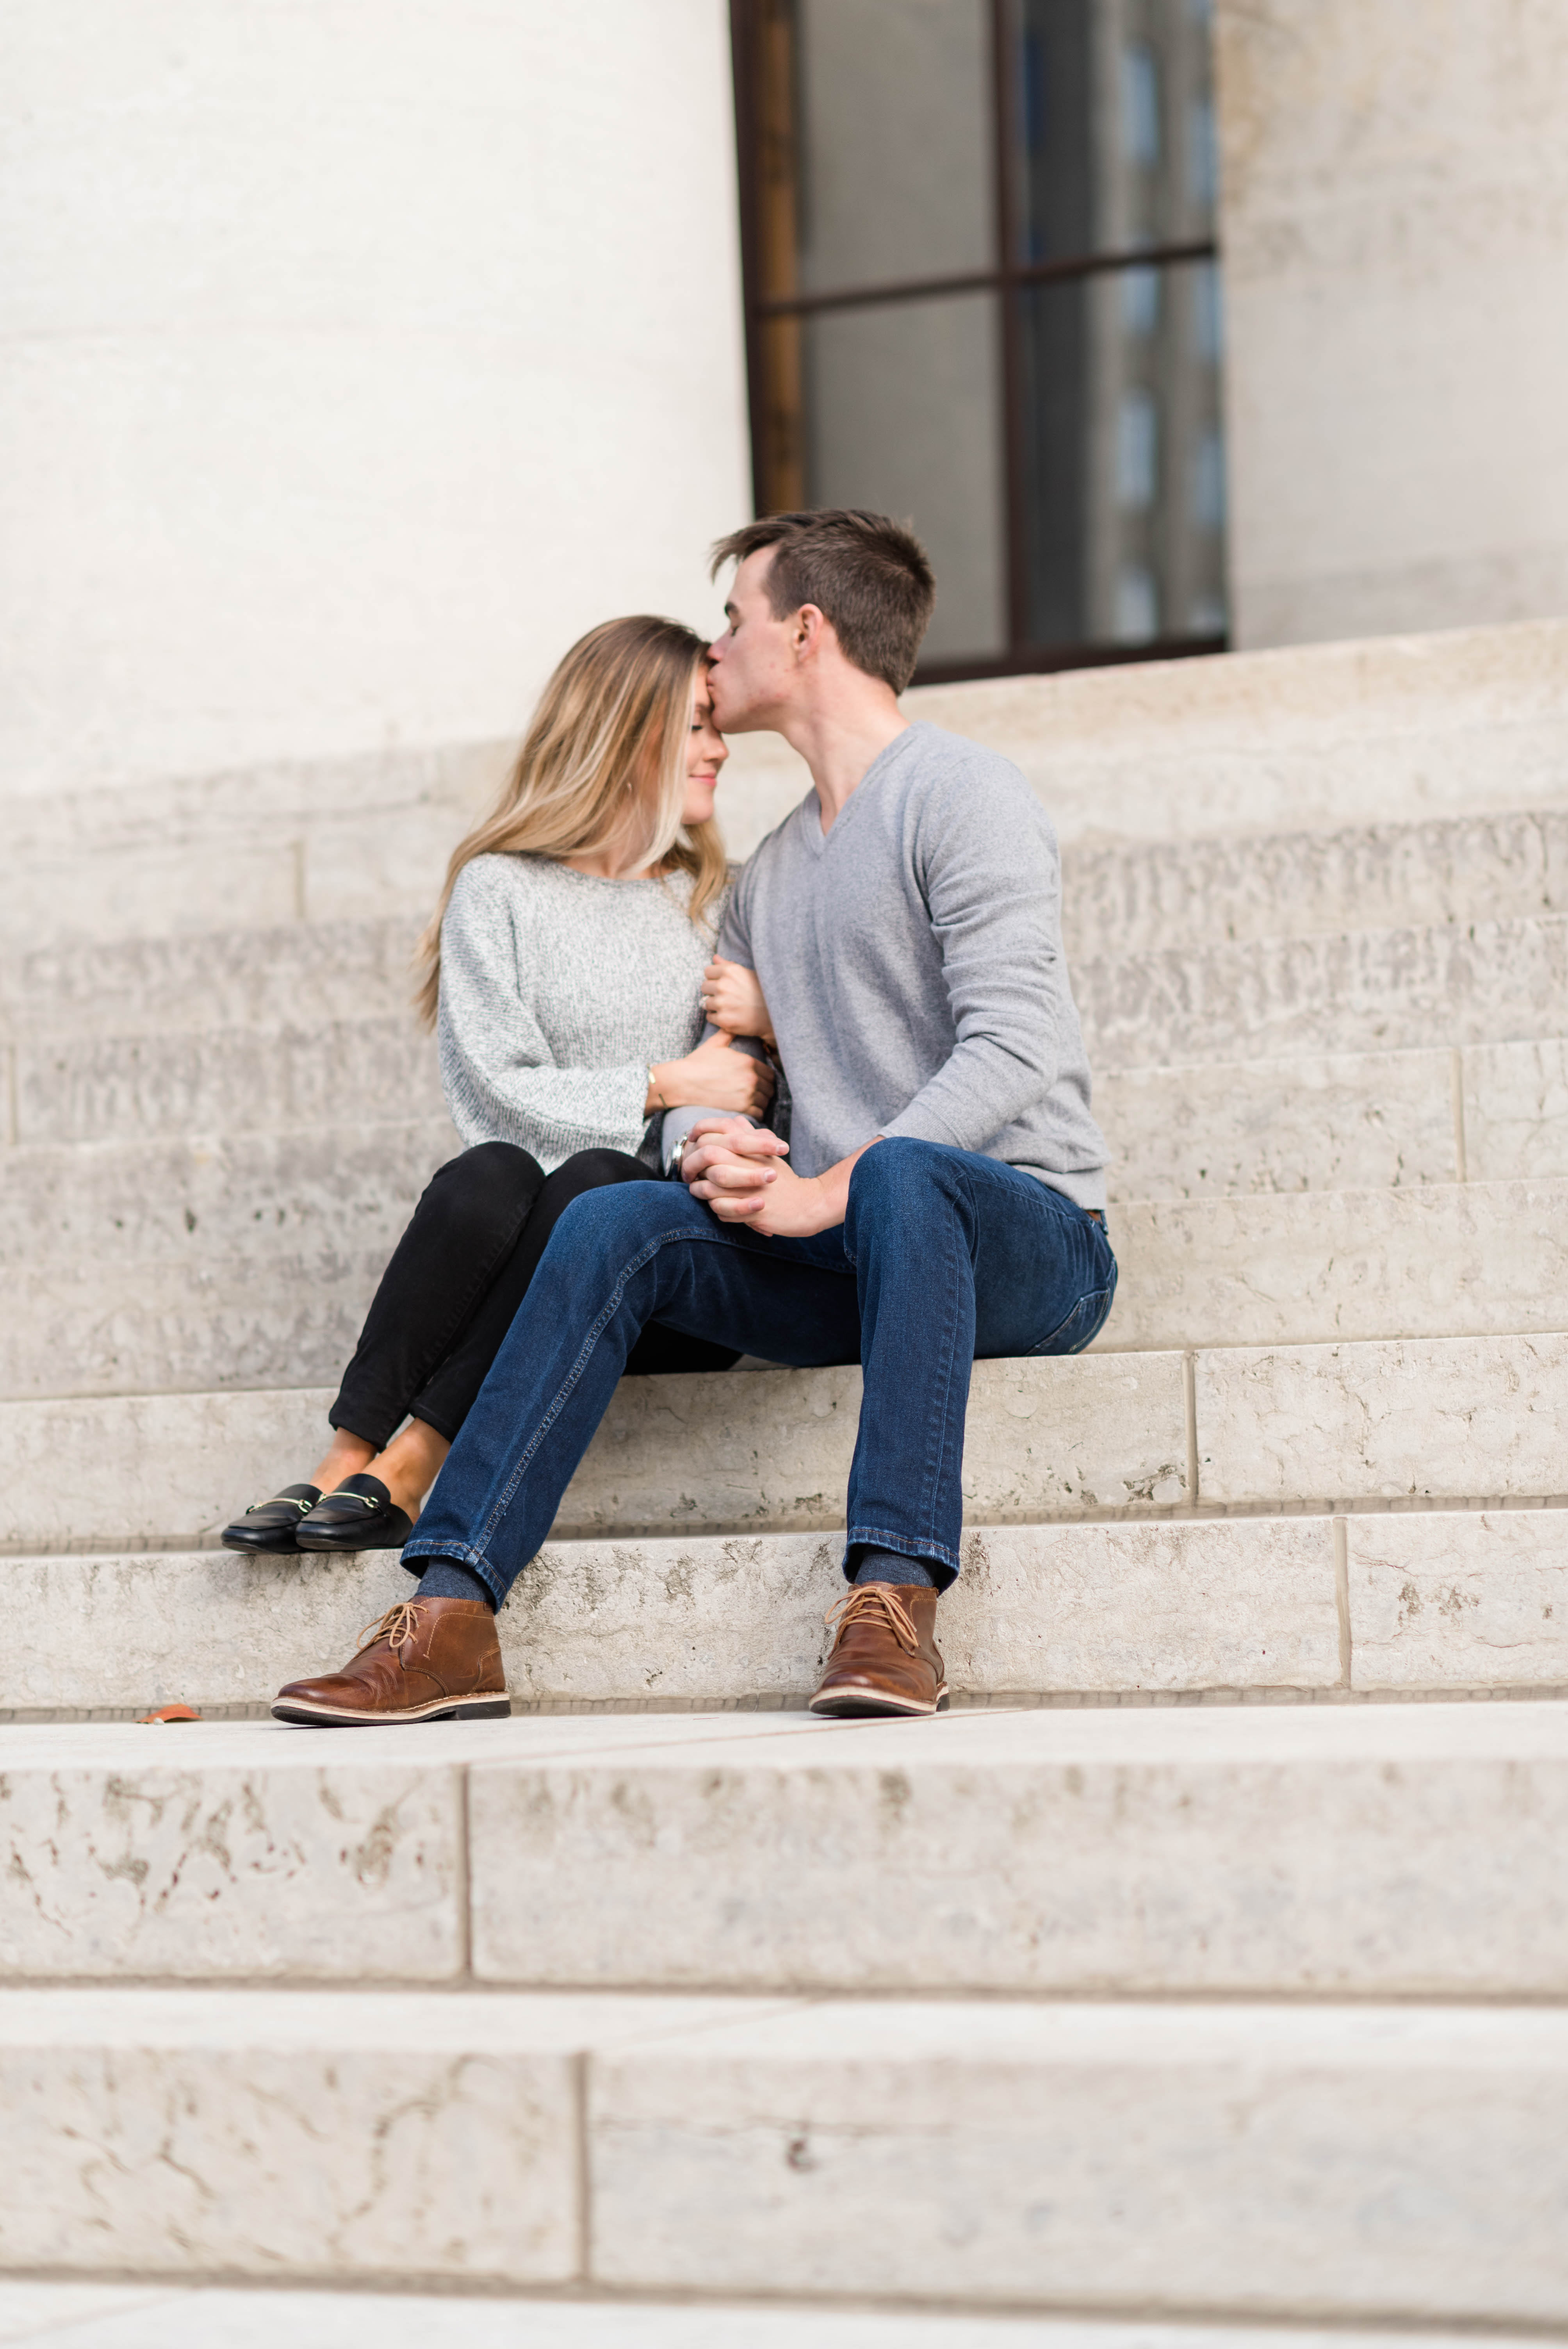 Regal Engagement at The Statehouse - Sweet Williams Photography Nashville, TN